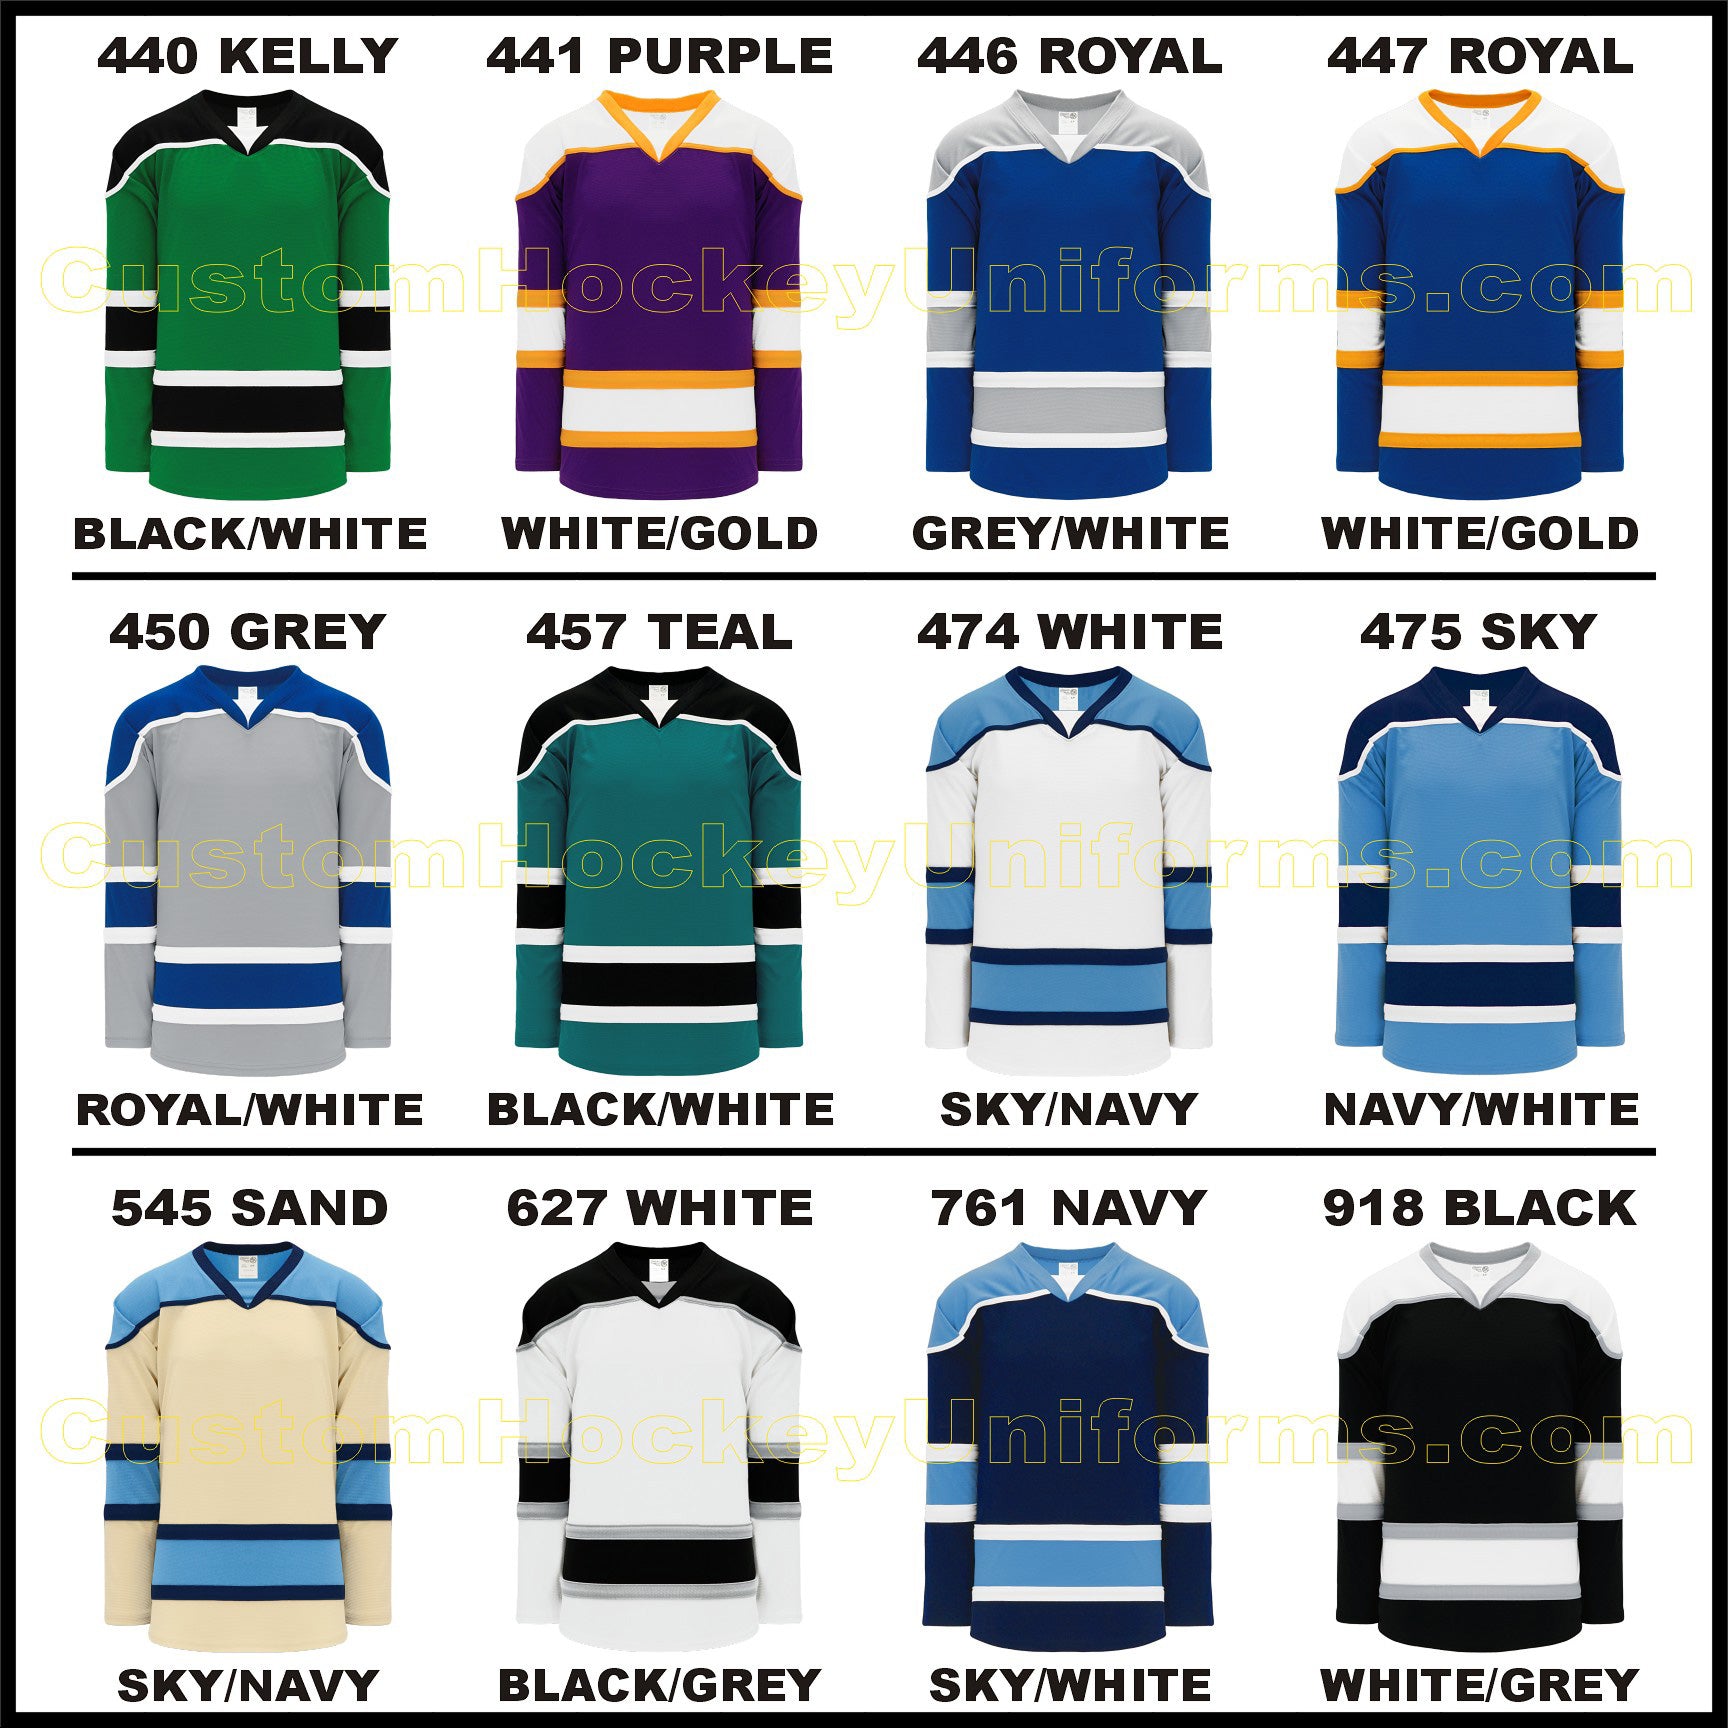 Get A.K. Select Series Hockey Jersey #H7500 Custom Printed or Embroidered